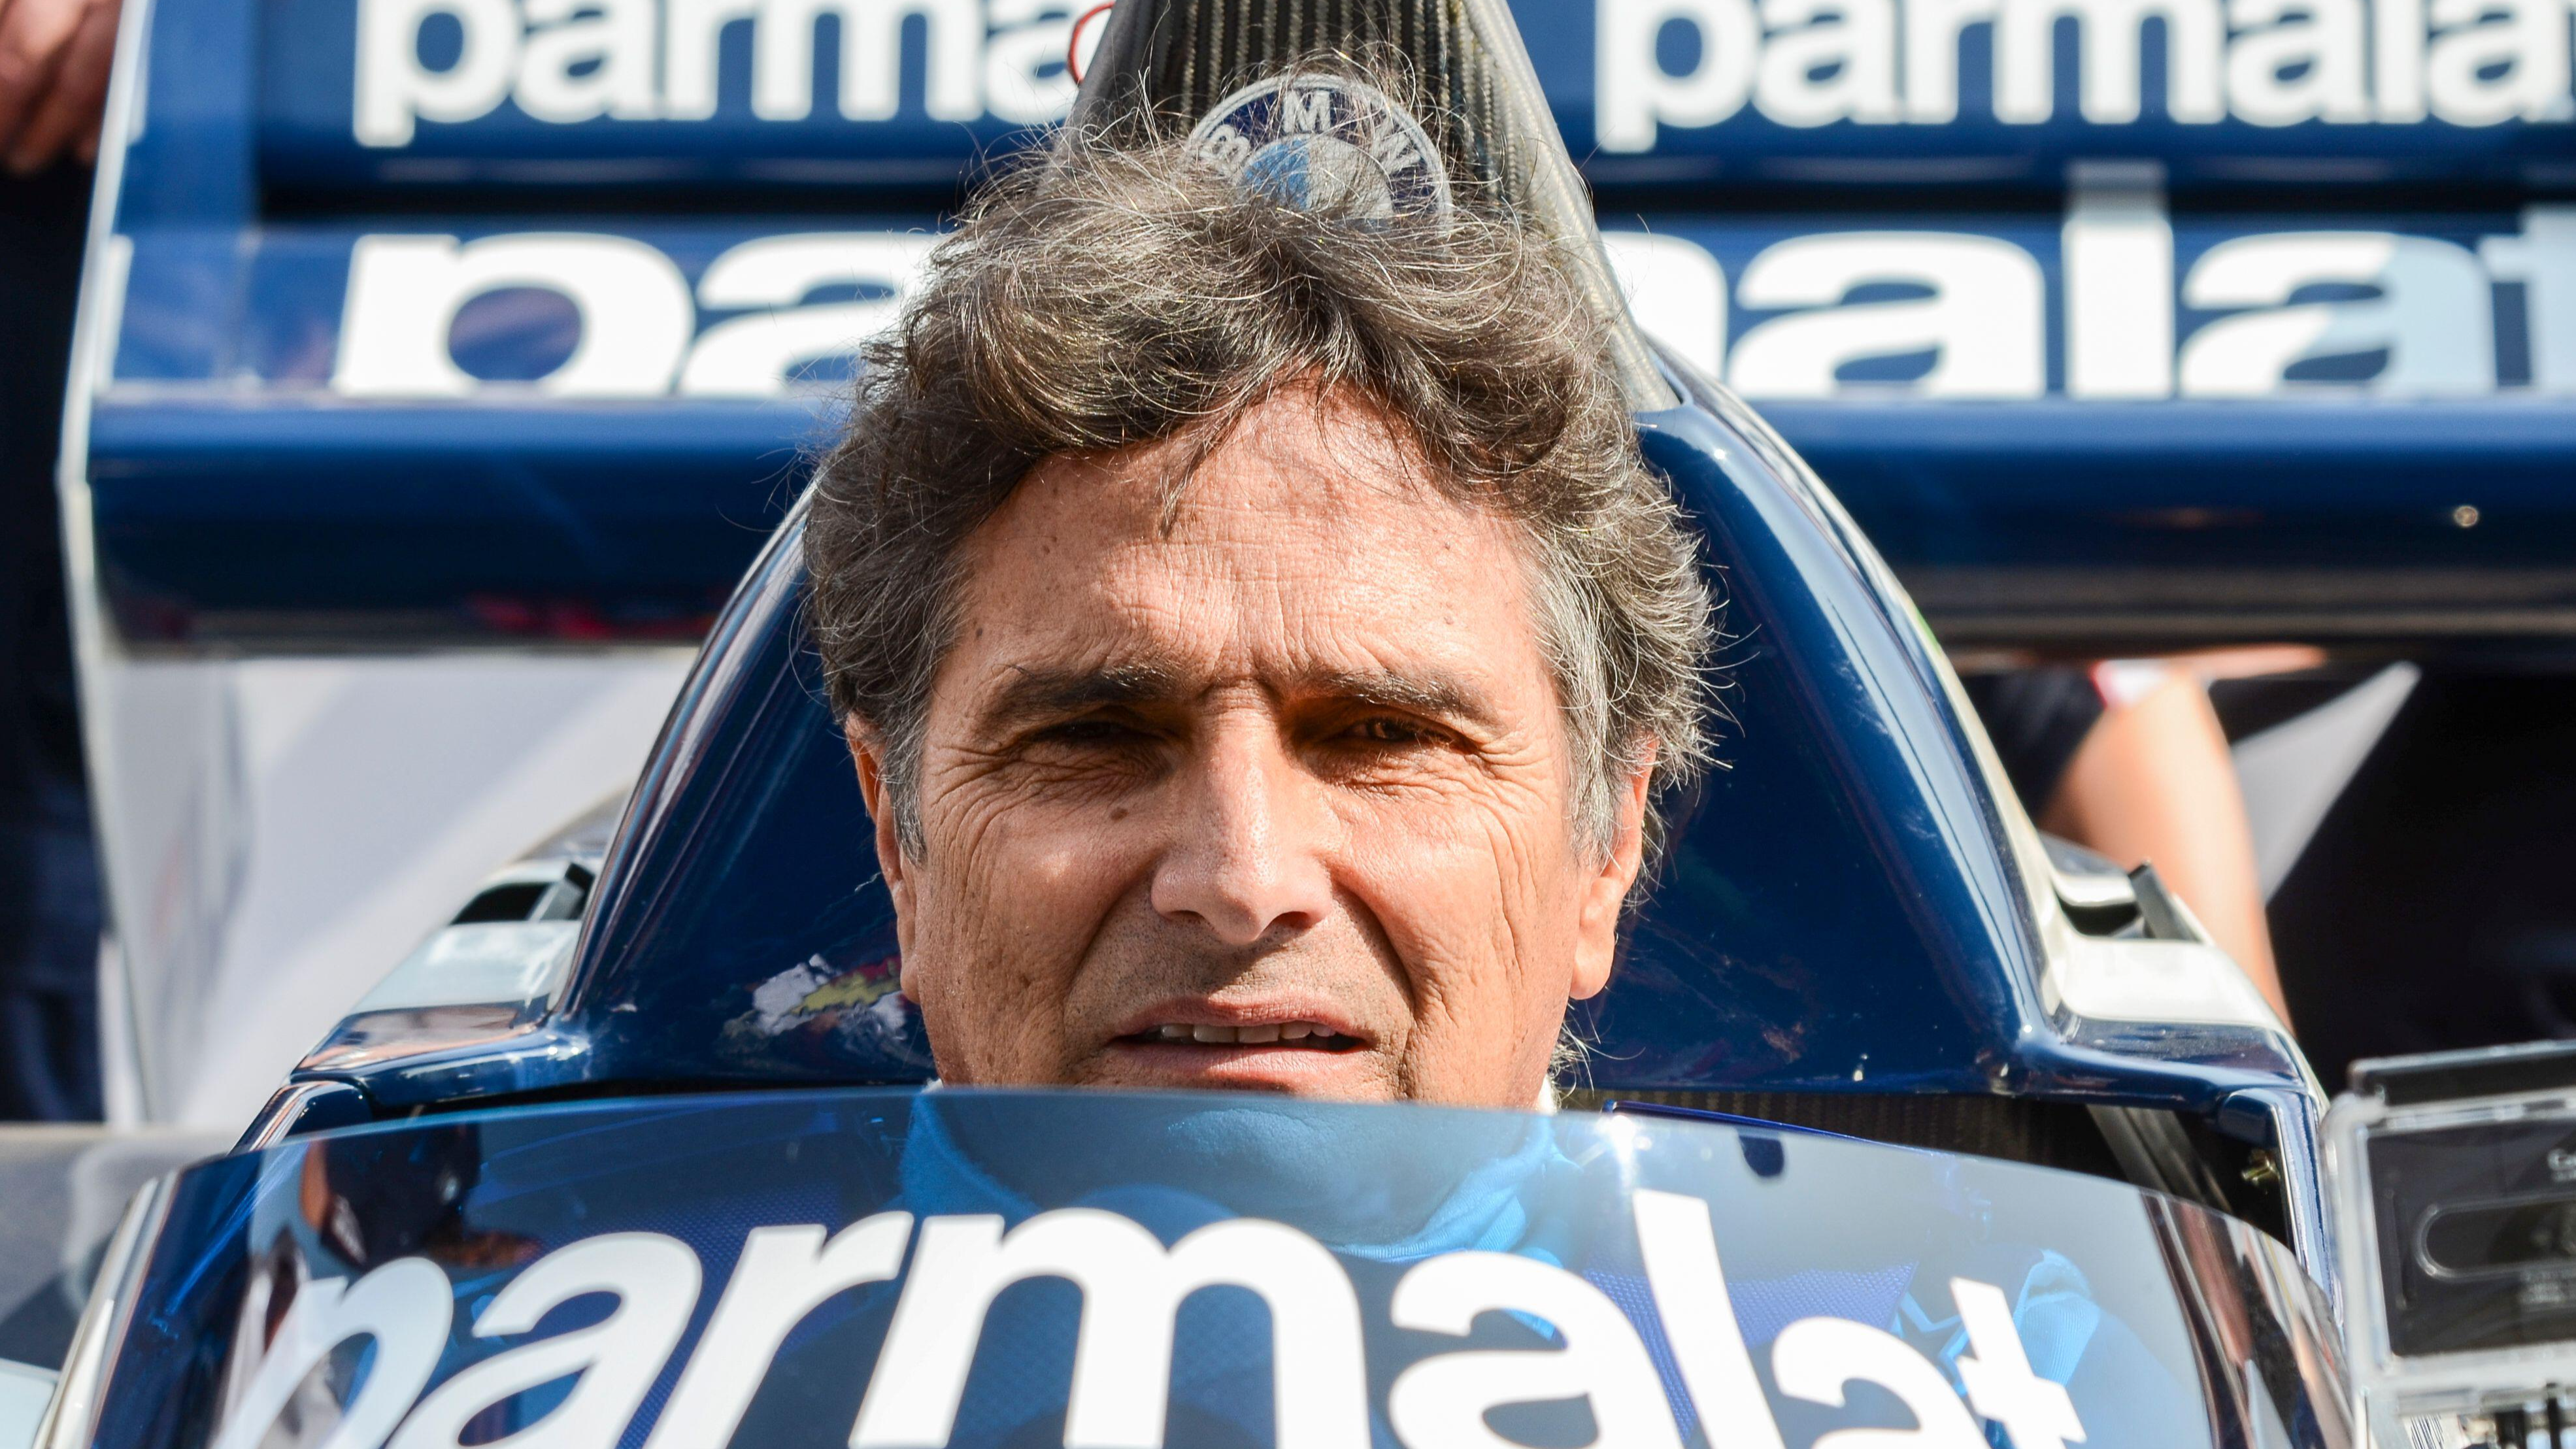 What Is Nelson Piquet’s Net Worth In 2022?